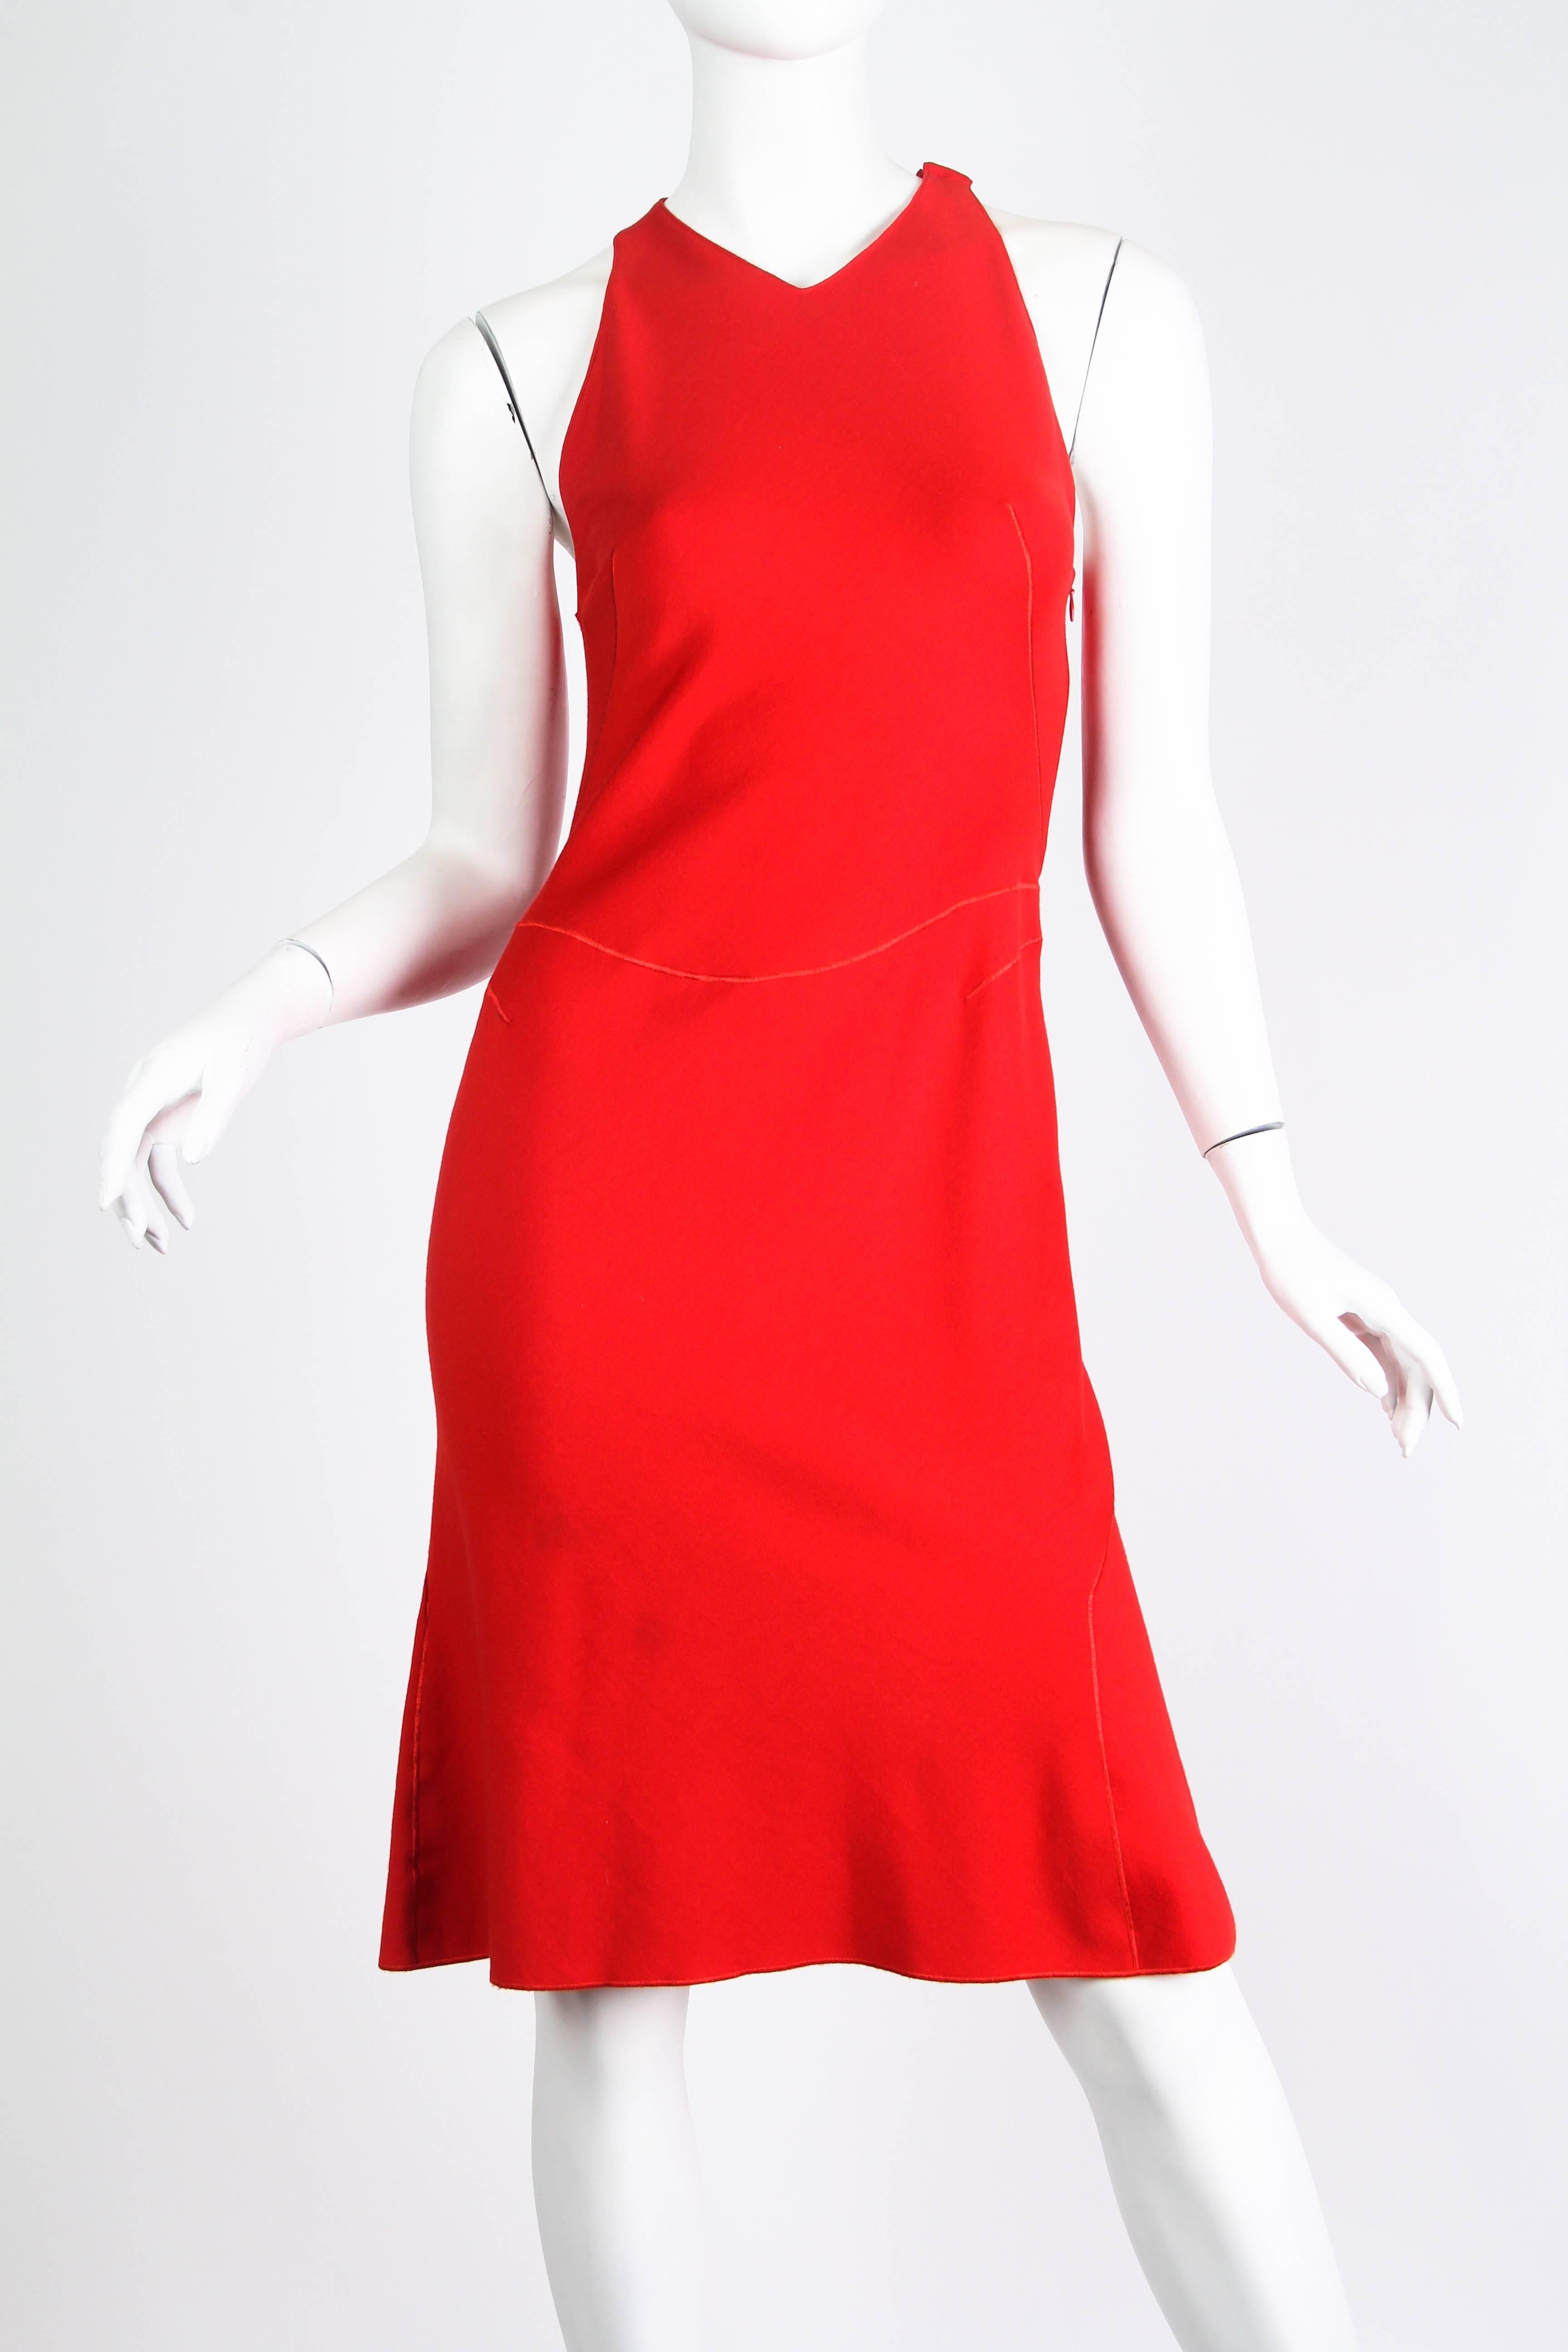 Gorgeous little dress from the man who knows best how to cut for a woman's figure. His designs are almost always done in his iconic black however this dress is in a gorgeous red which is exciting and rare. 